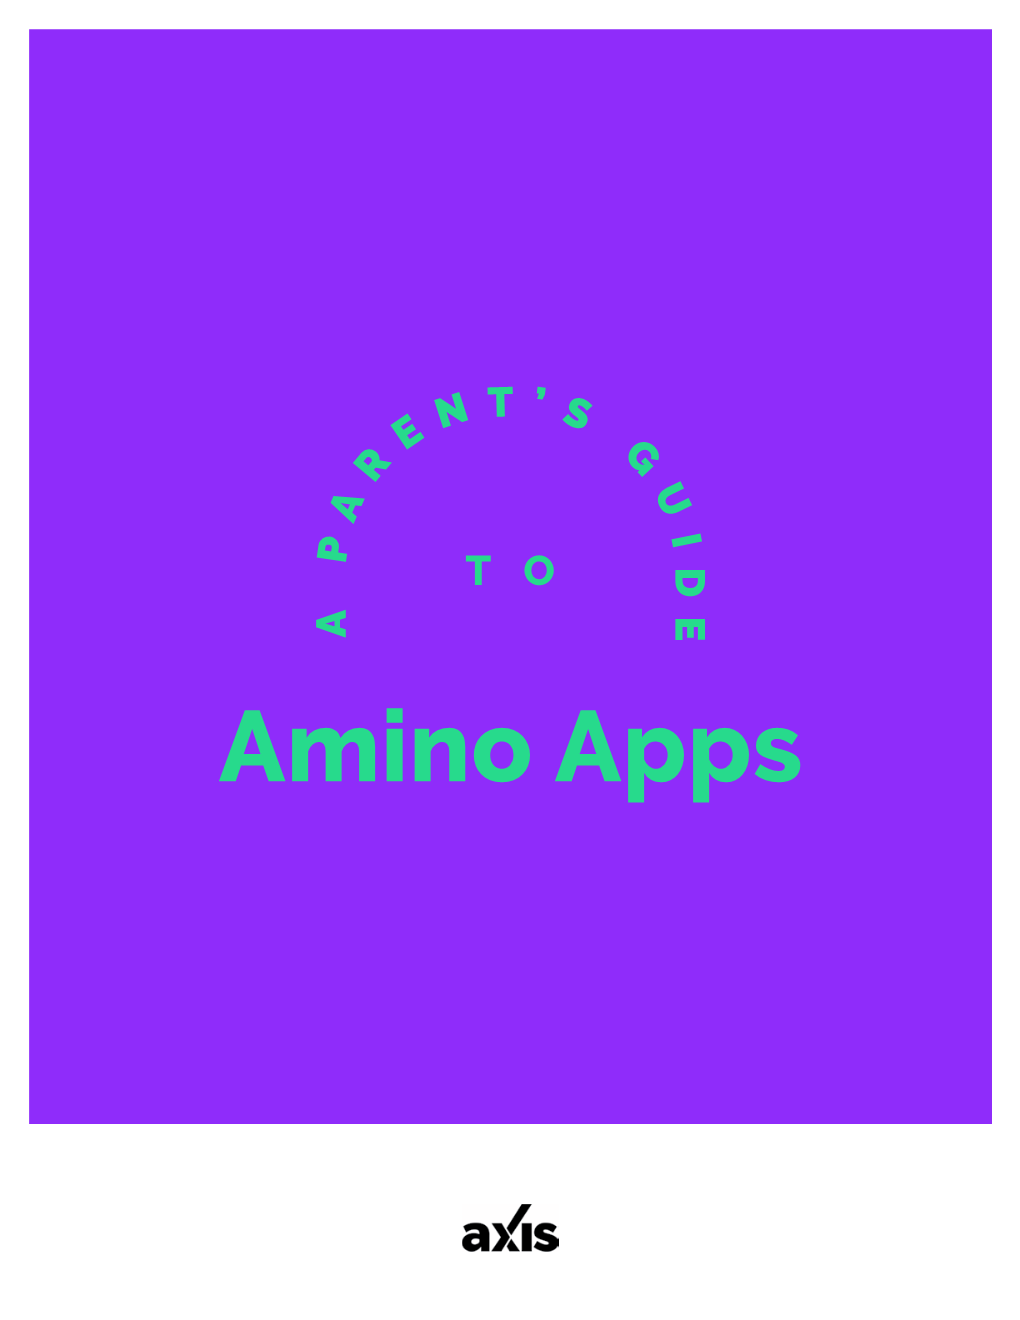 Amino Apps It’S Kind of Like Reddit, Except It Does More and Is Made for Mobile